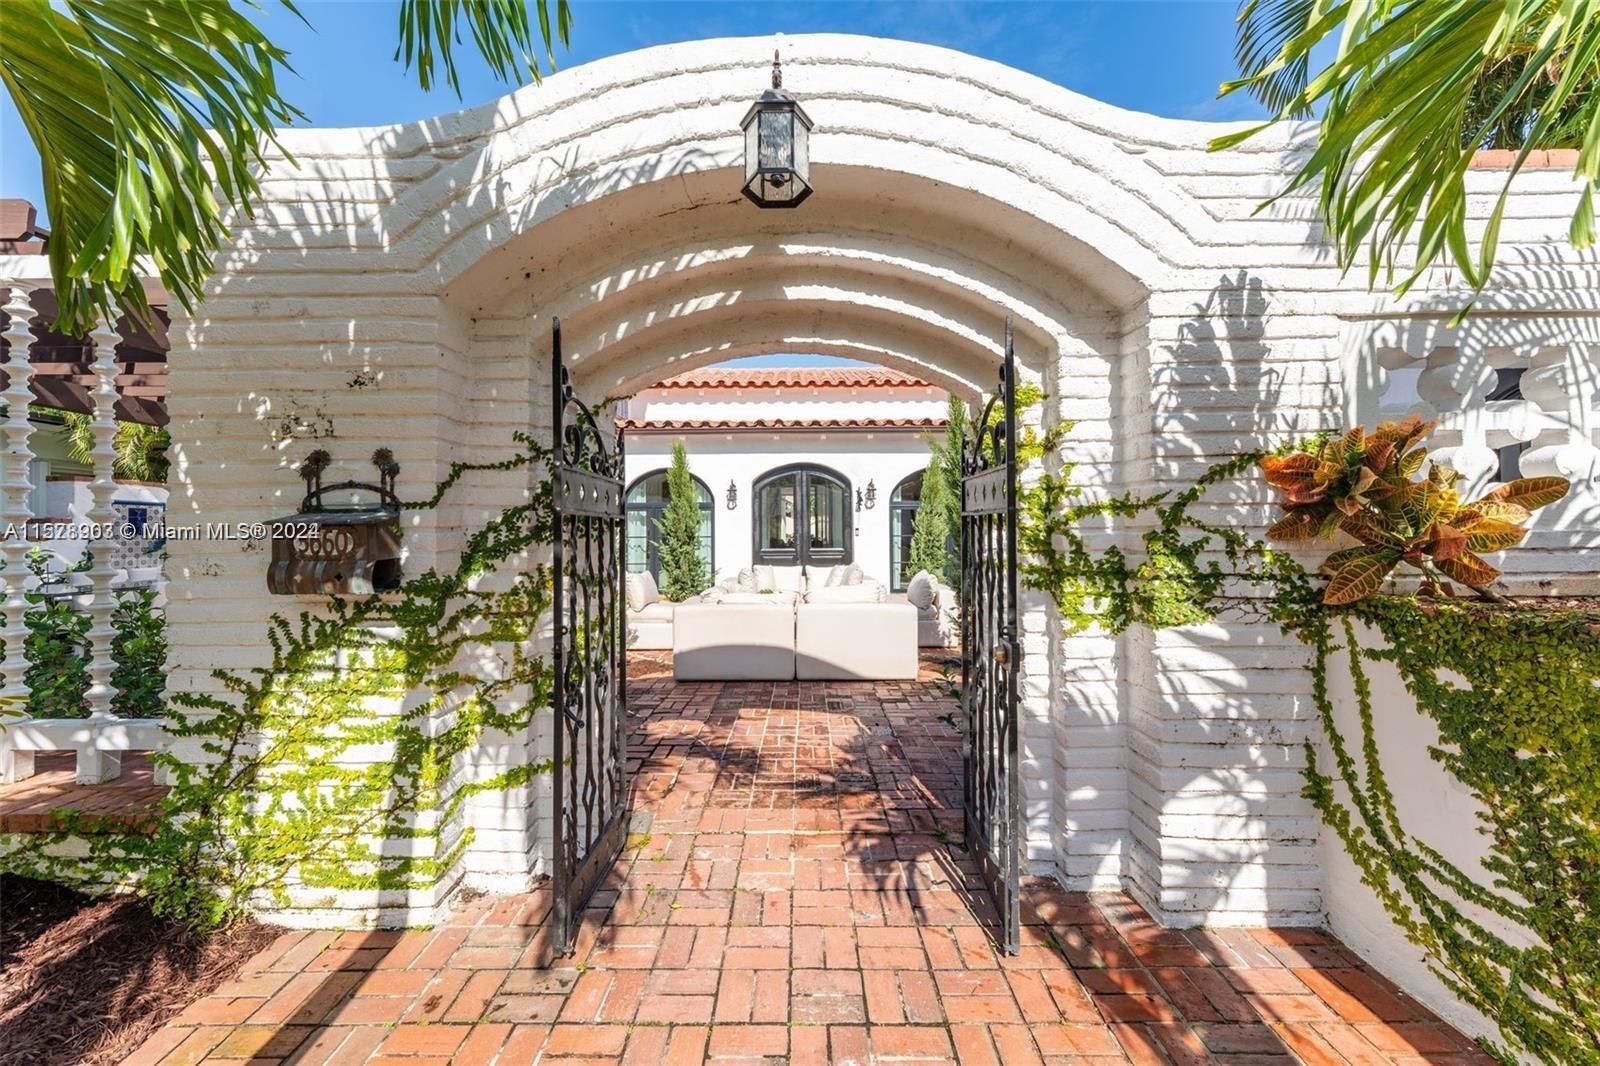 Step into this Spanish Mediterranean home with an impressive, gated courtyard featuring a water foun